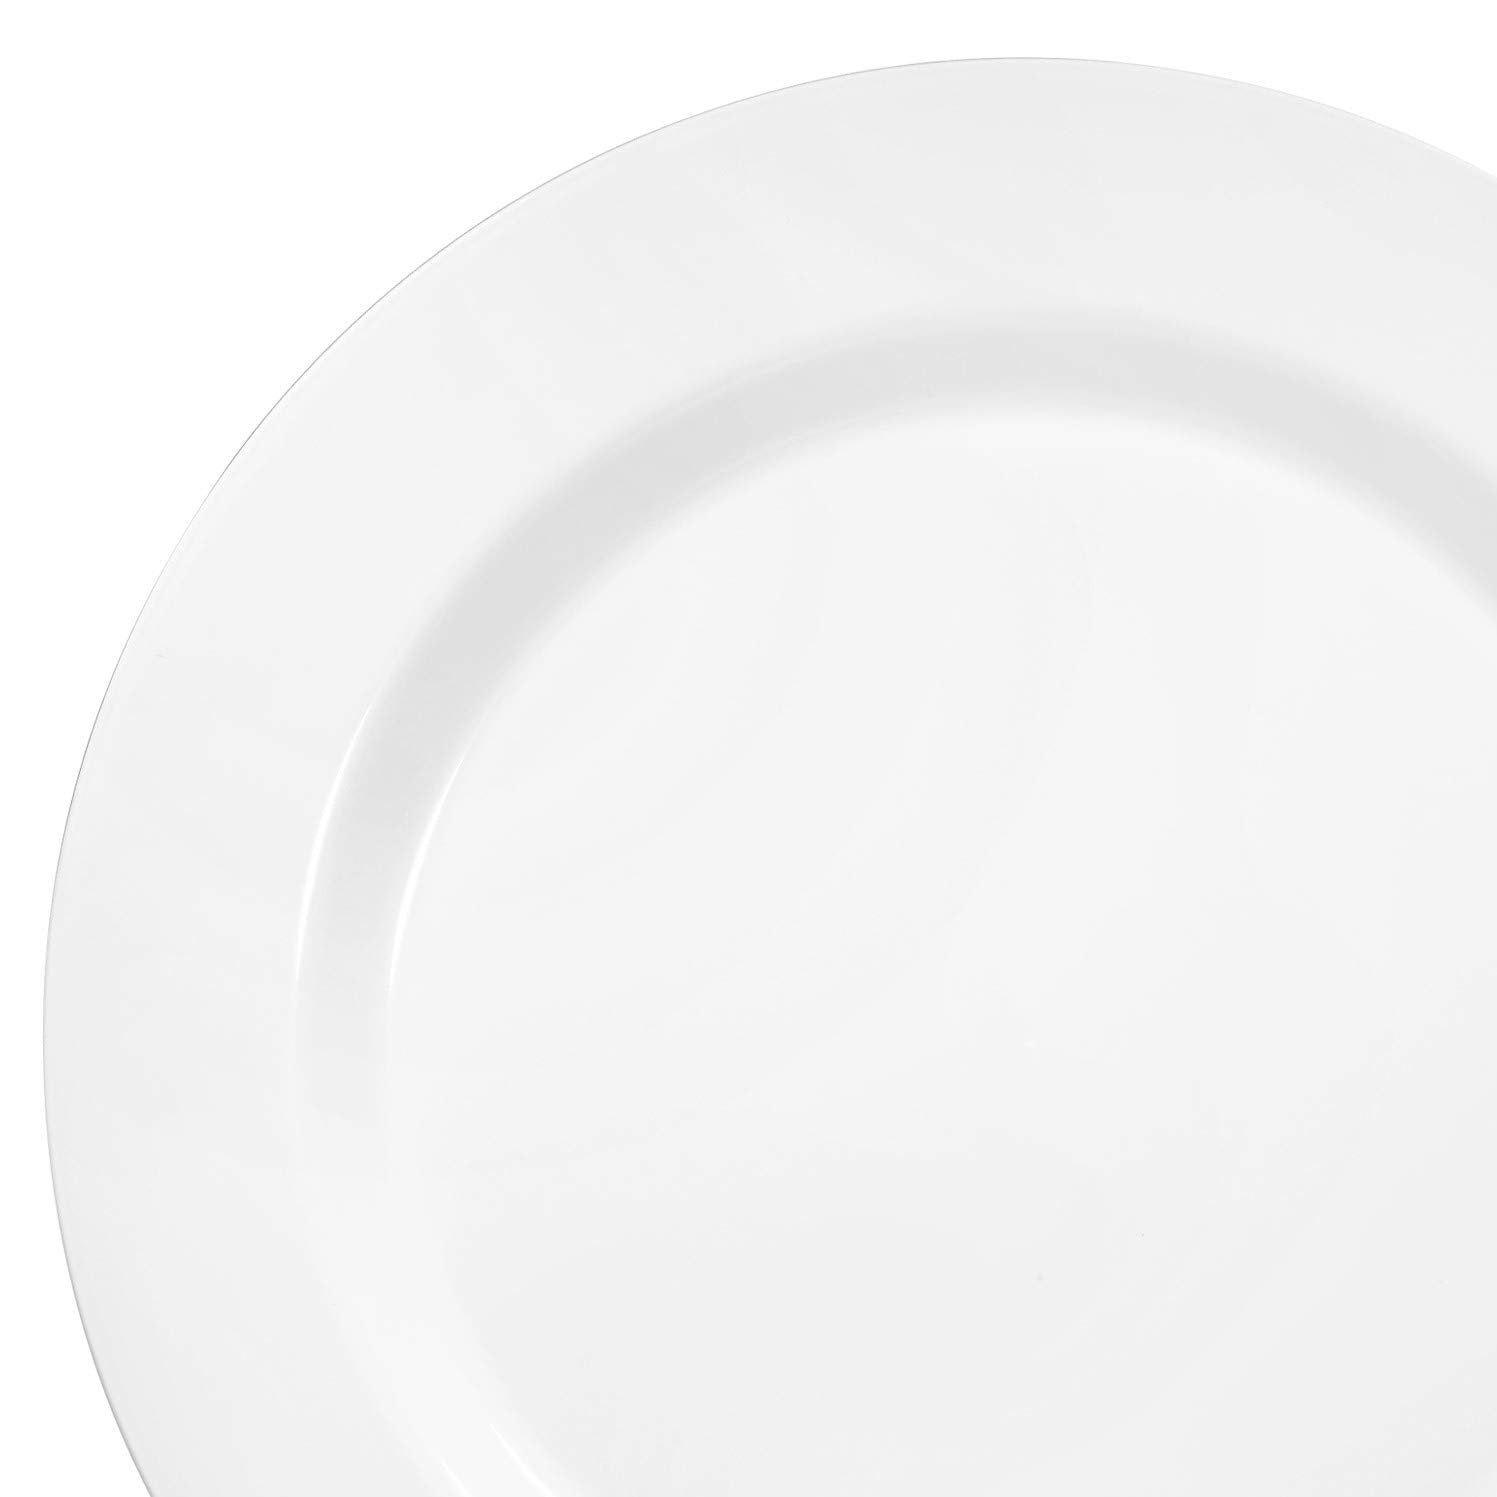 OCCASIONS  40 Plates Pack, Heavyweight Disposable Wedding Party Plastic Plates (7.5'' Appetizer/Dessert Plate, Plain White)